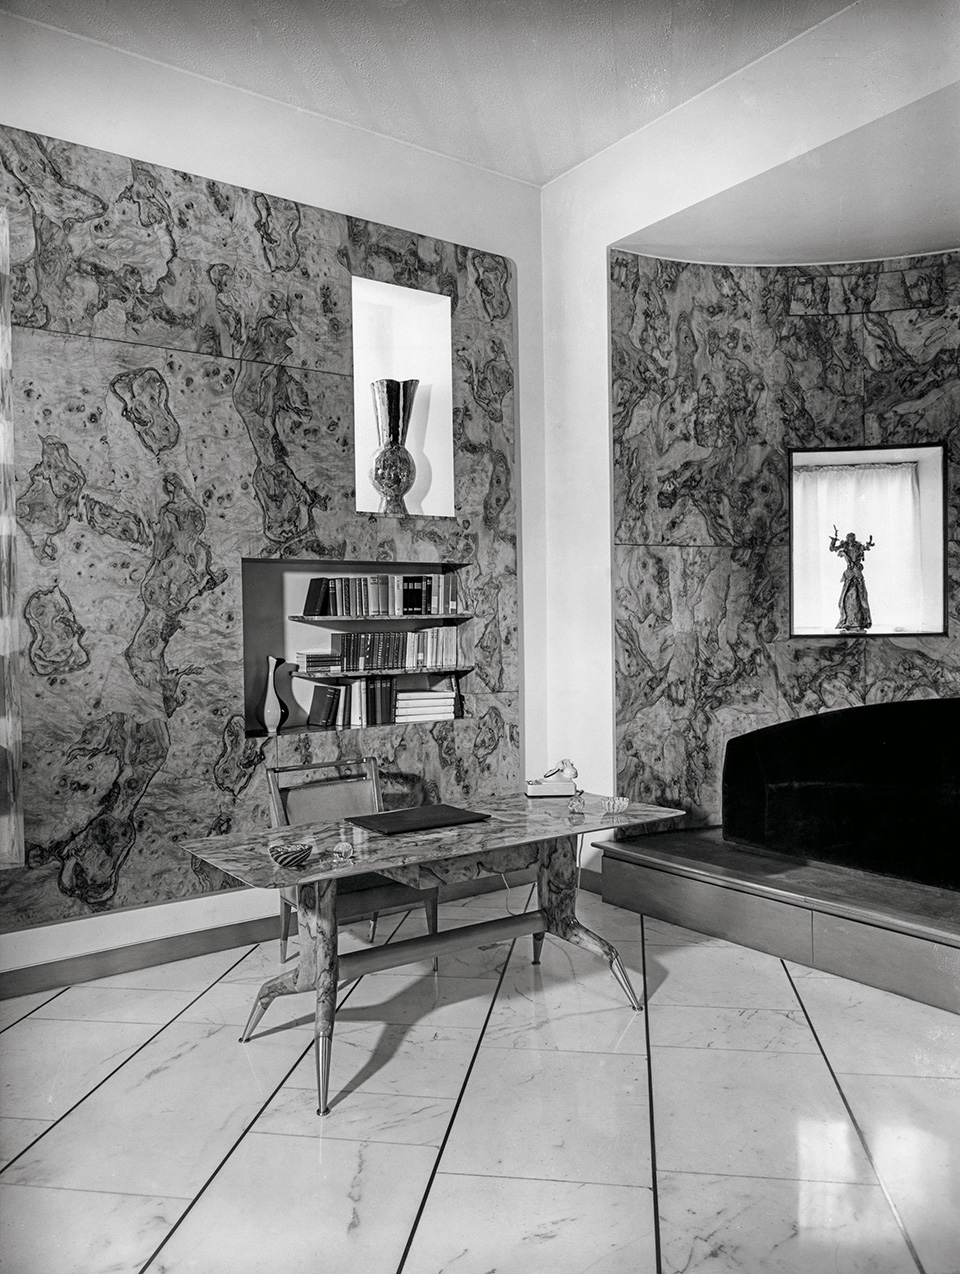 The main reception room of the Ceccato apartment in Milan, as seen in the book Gio Ponti, offered by Taschen